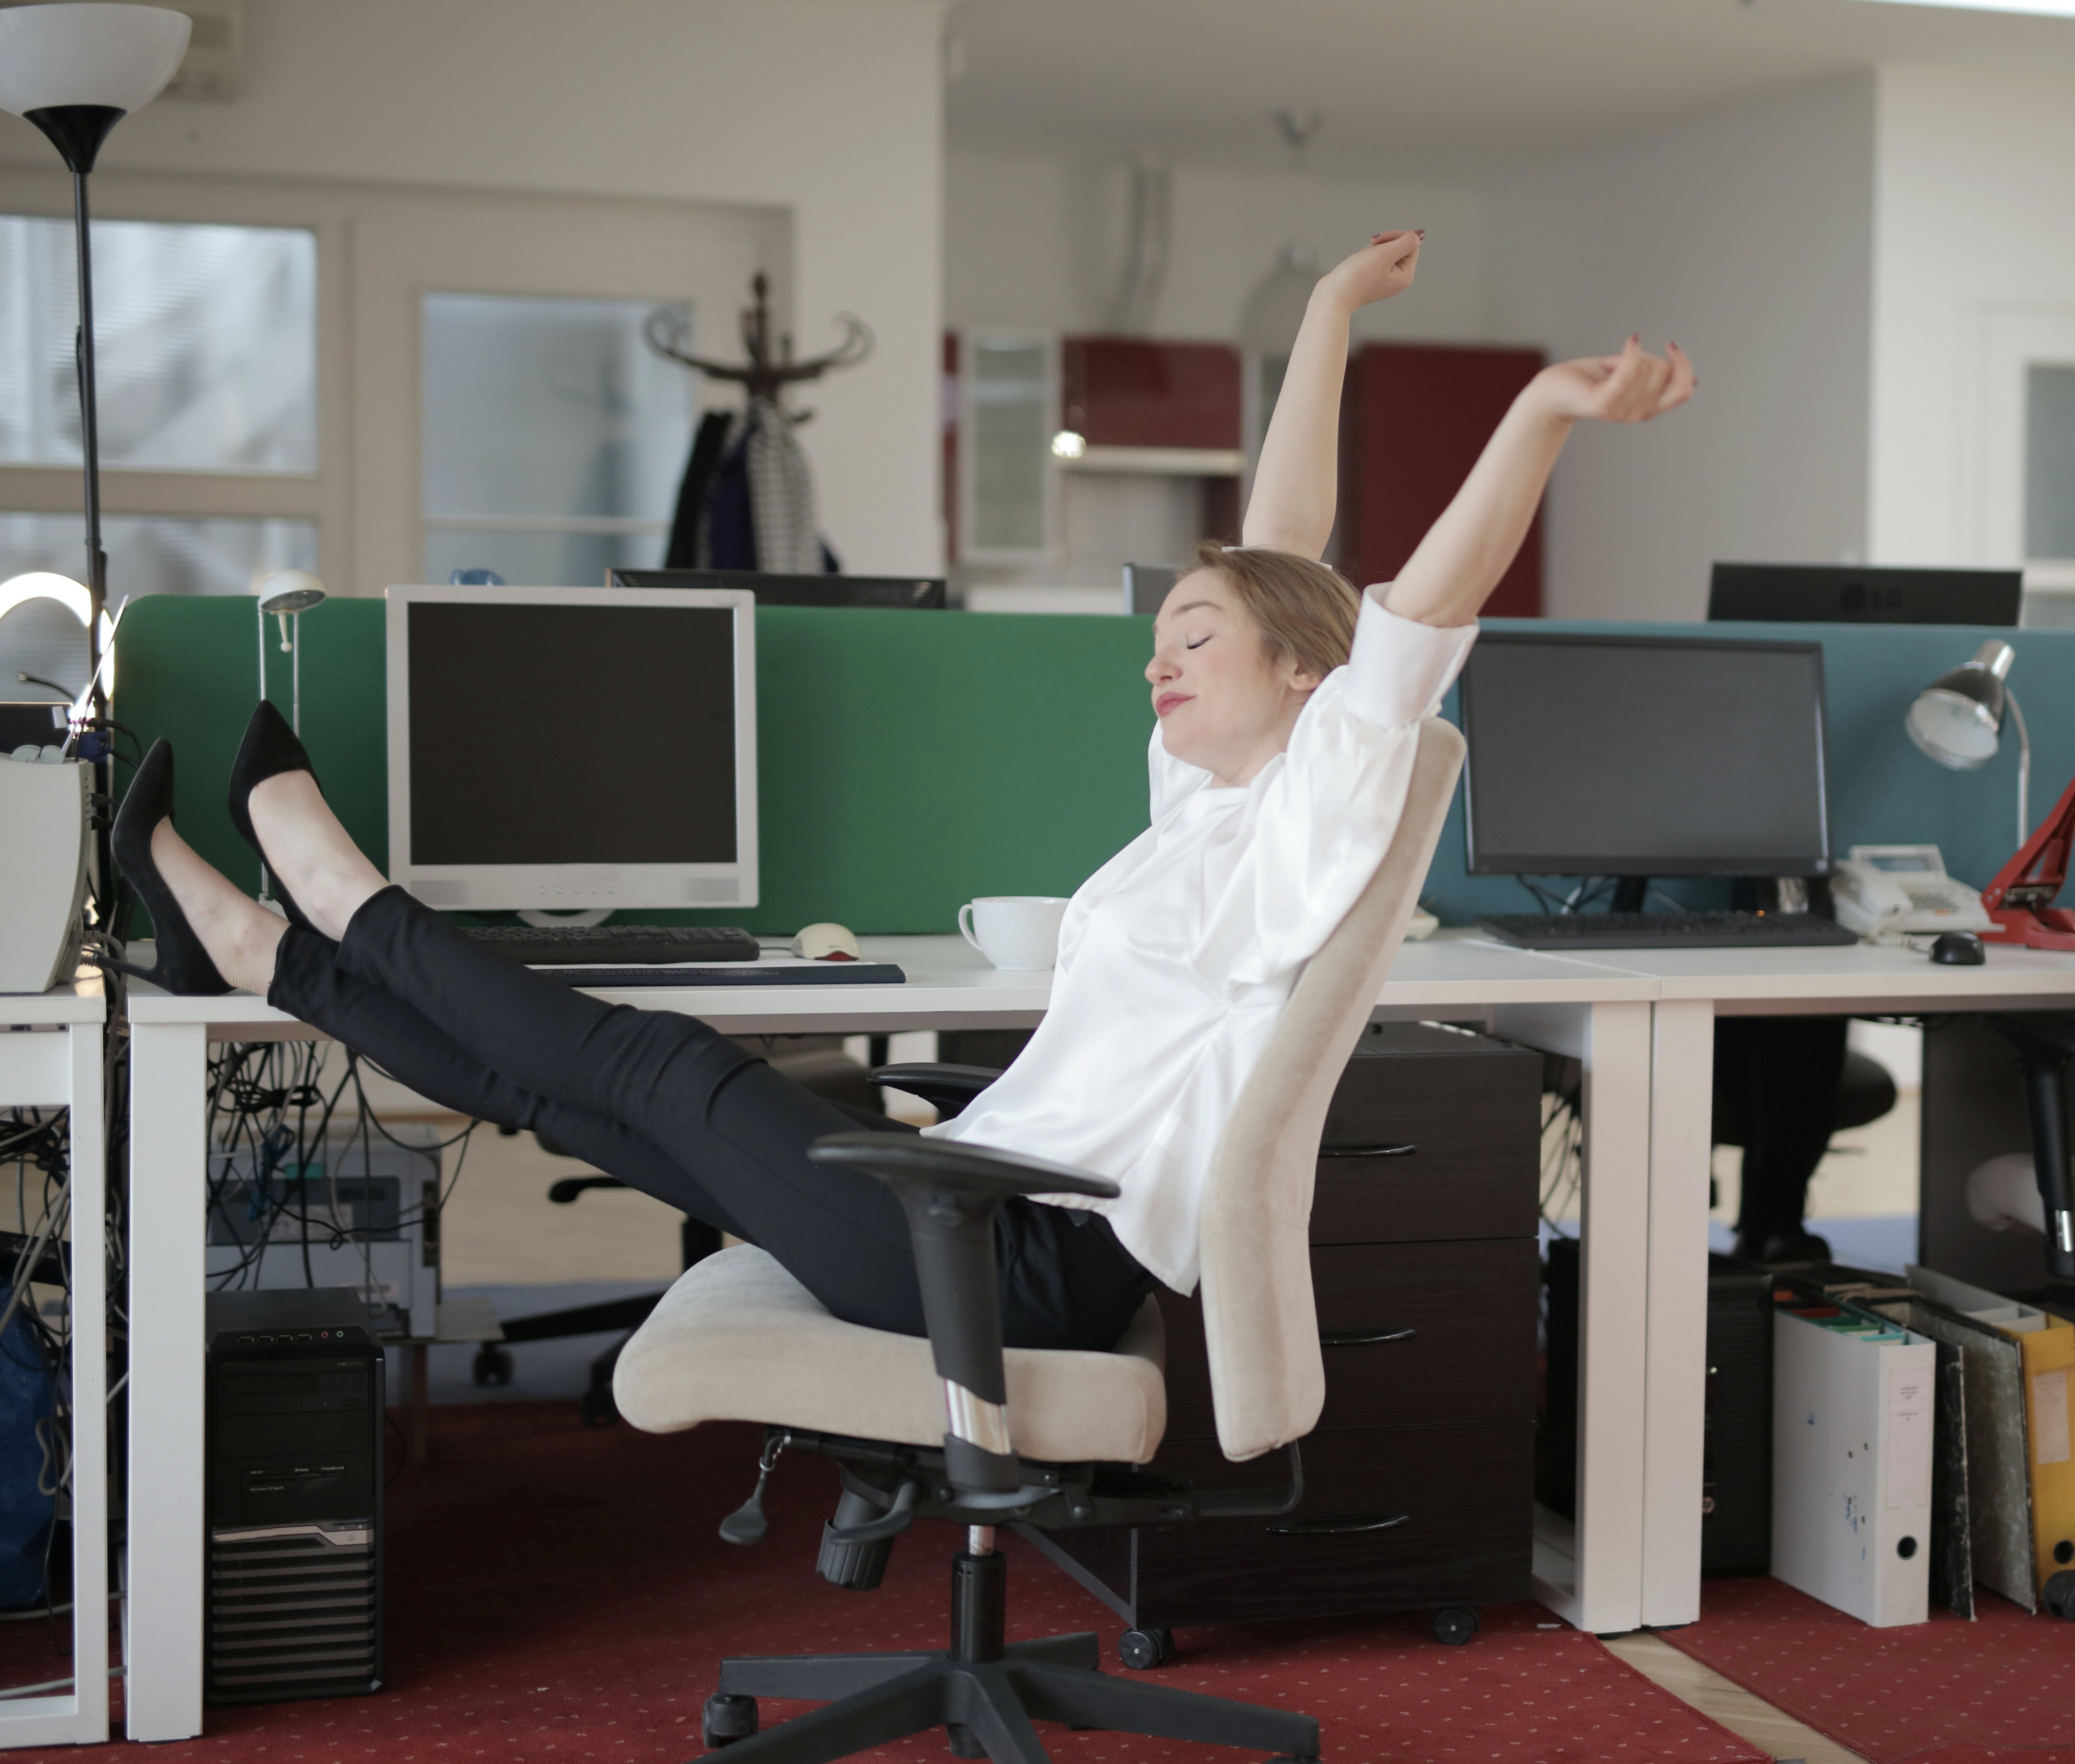 4 Tips to De-Stress at your Desk